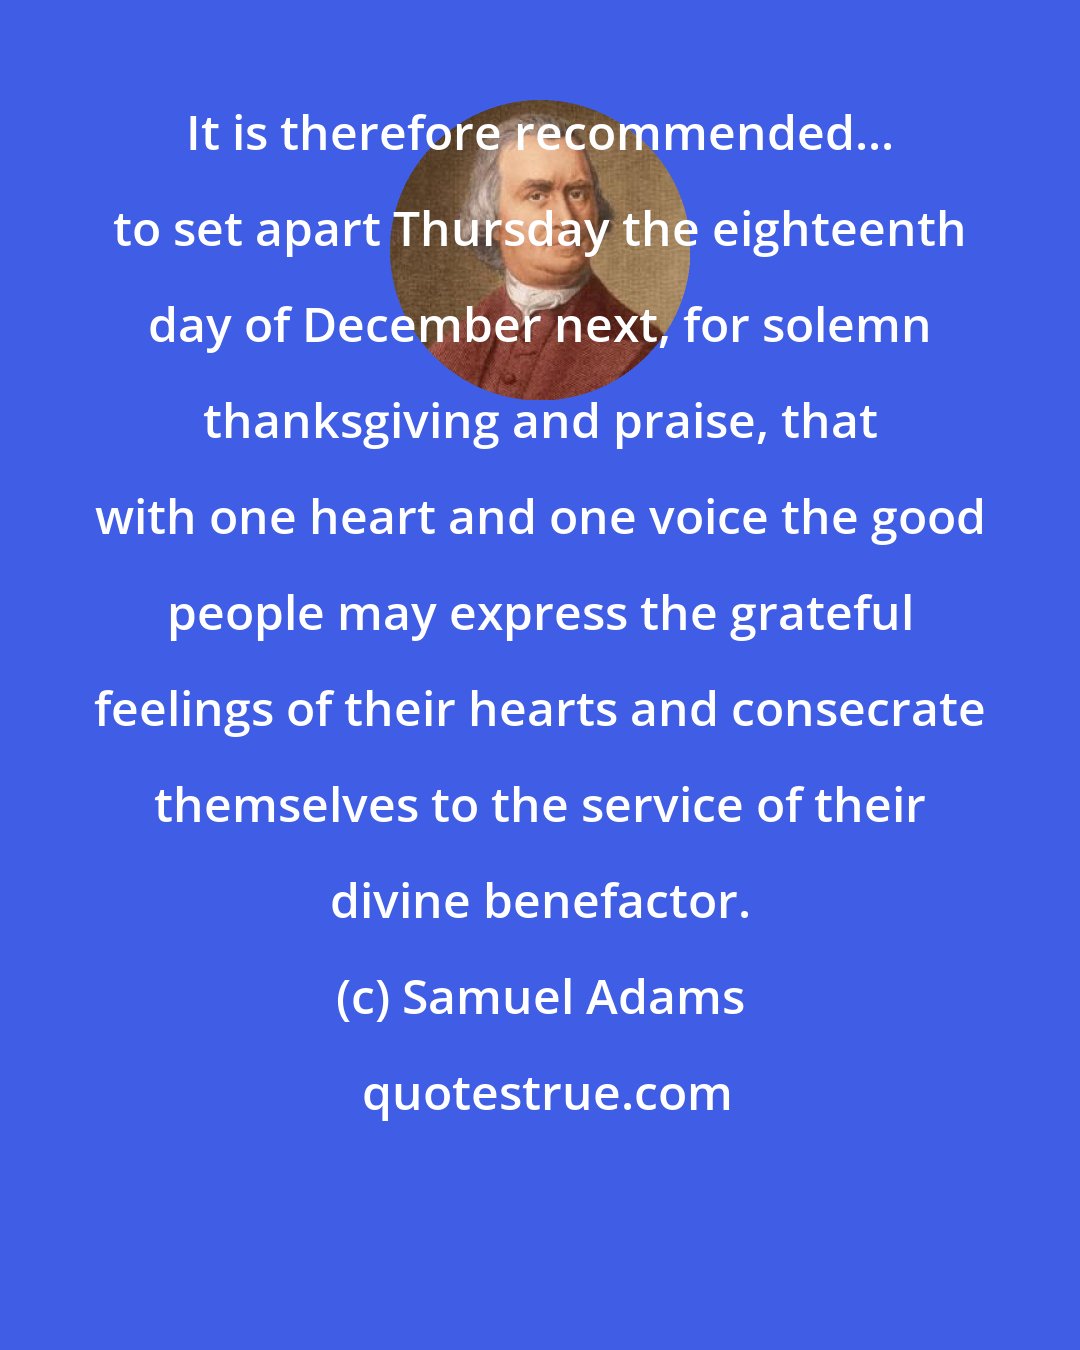 Samuel Adams: It is therefore recommended... to set apart Thursday the eighteenth day of December next, for solemn thanksgiving and praise, that with one heart and one voice the good people may express the grateful feelings of their hearts and consecrate themselves to the service of their divine benefactor.